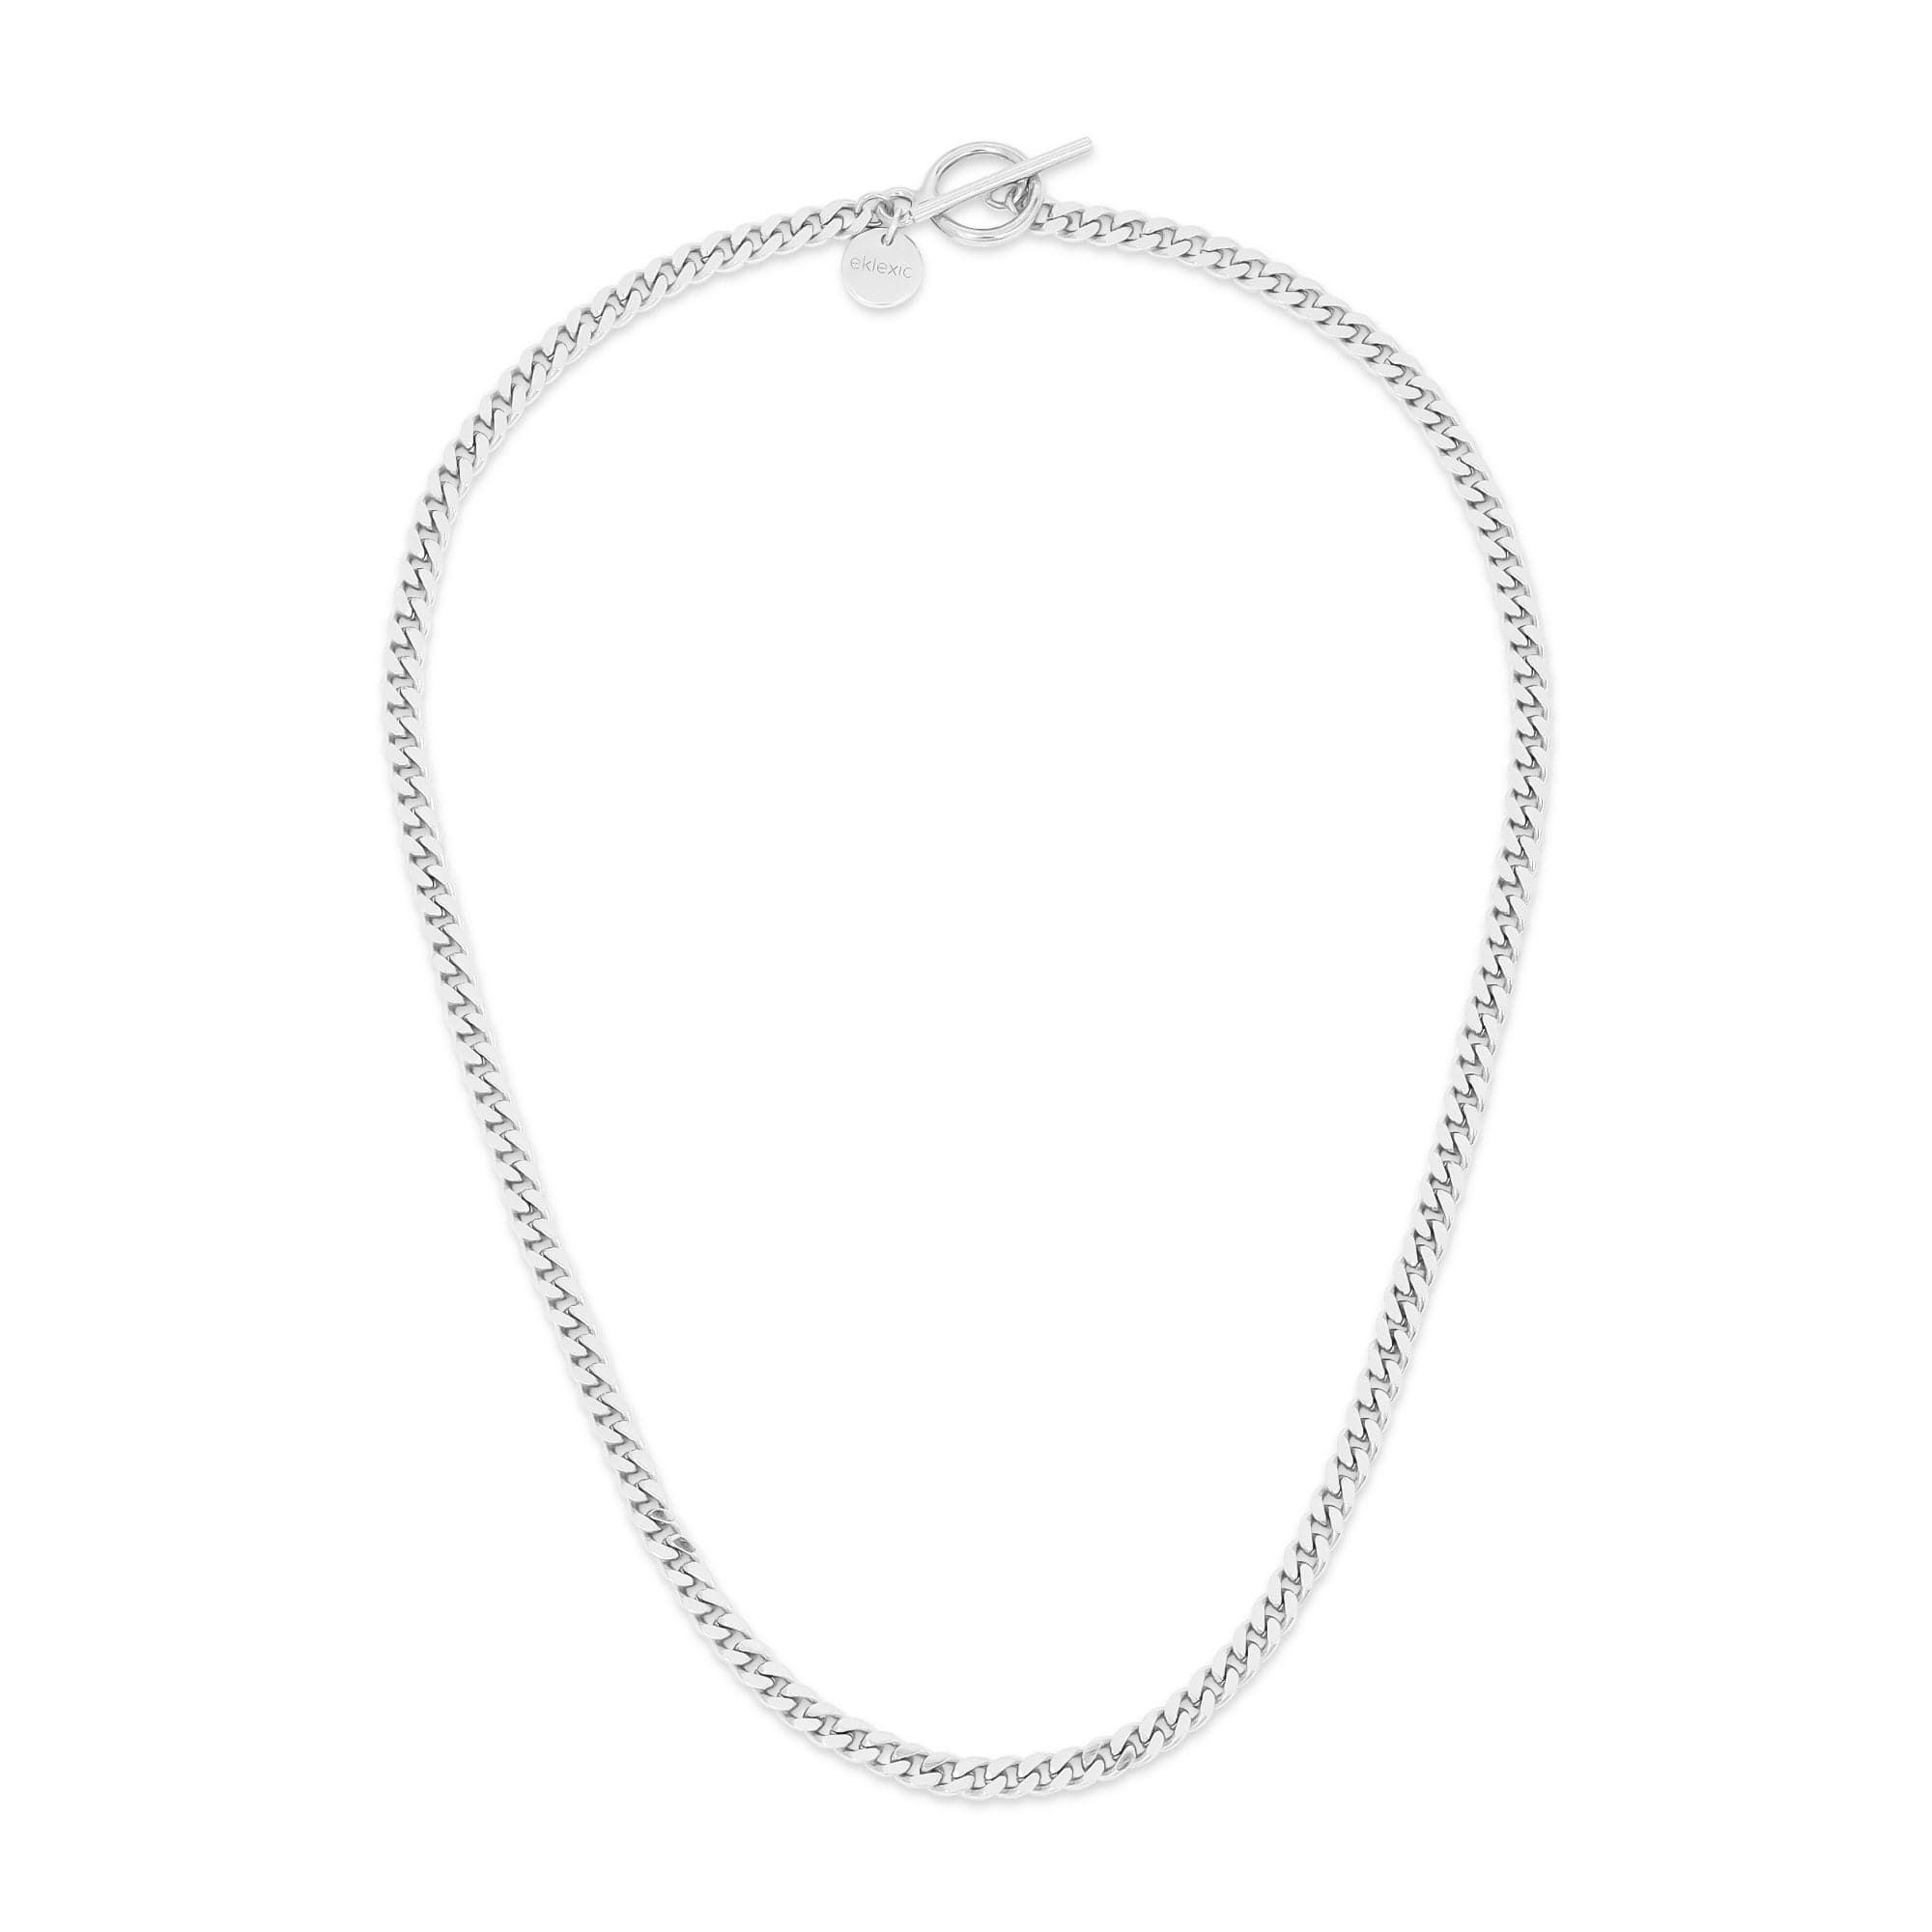 a silver chain with a clasp on a white background